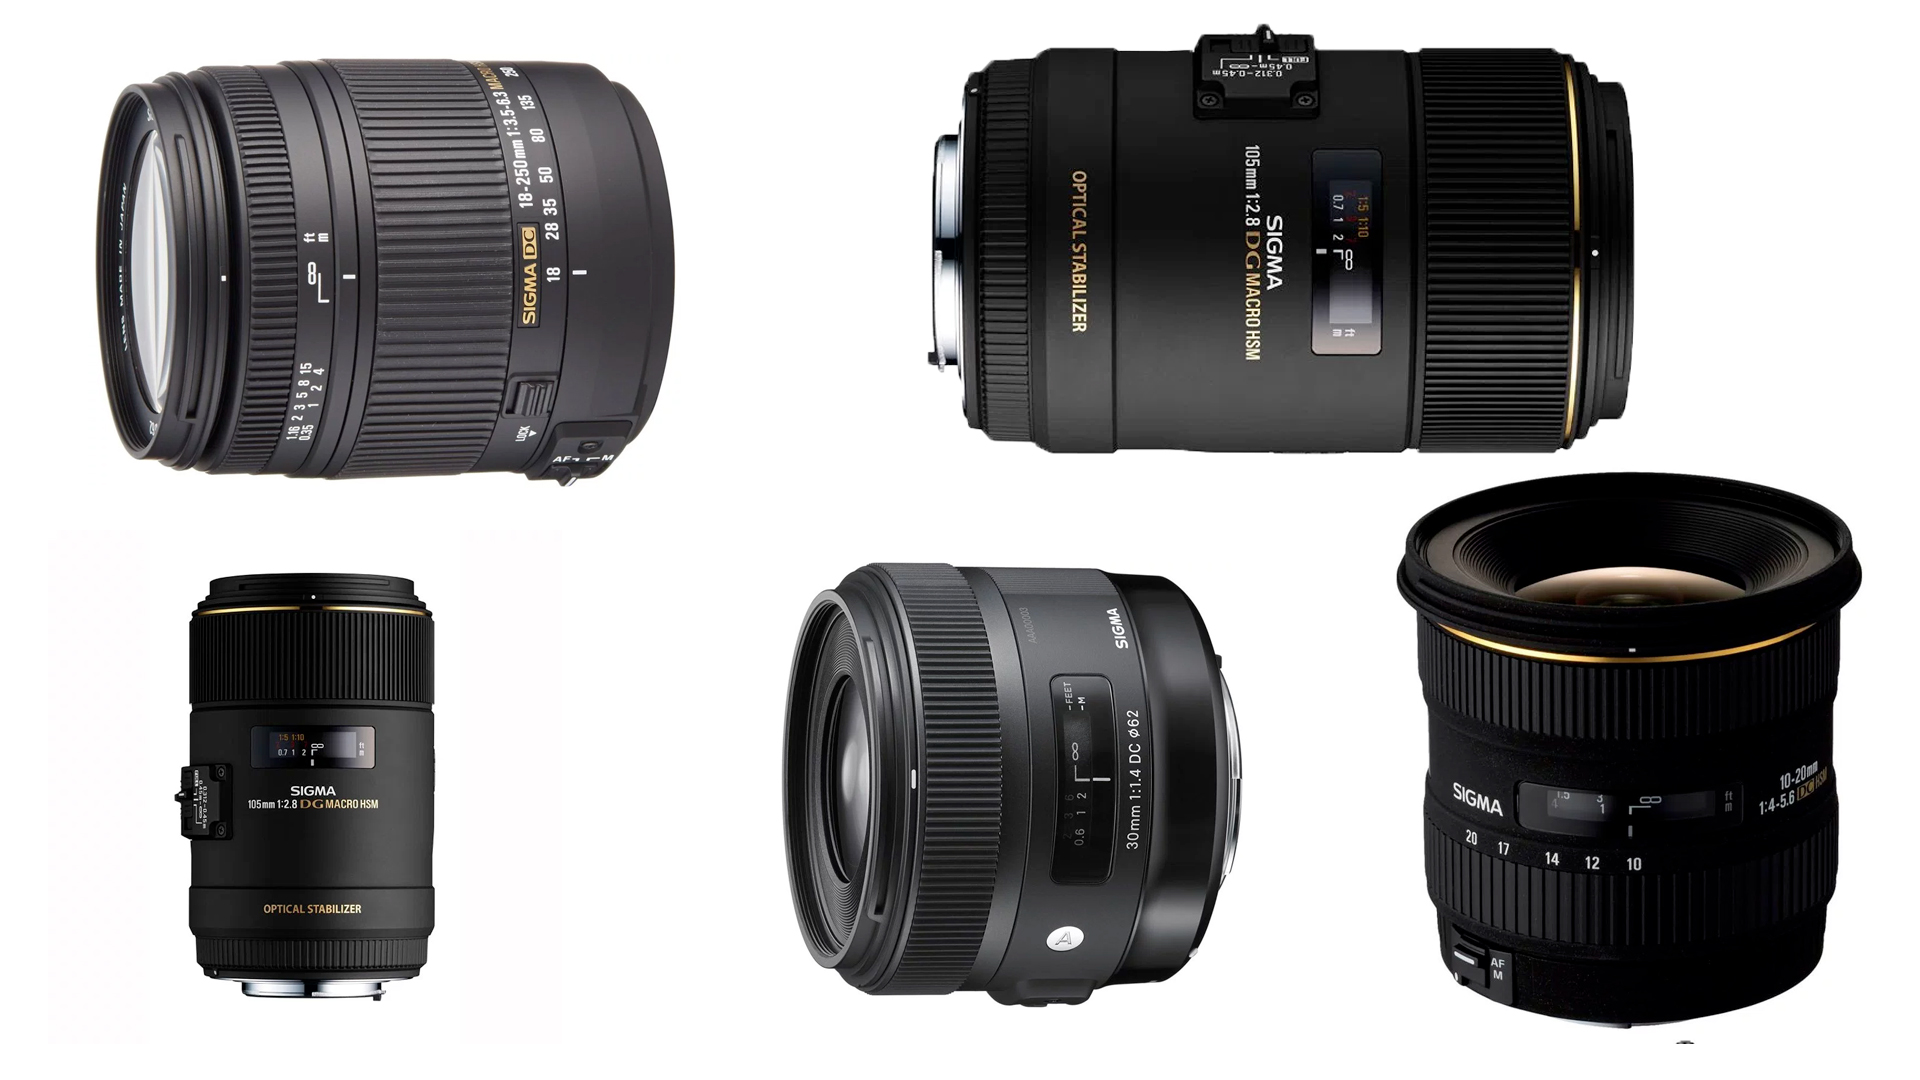 11 Best Sigma Lenses for Canon Your Buying Guide (2020